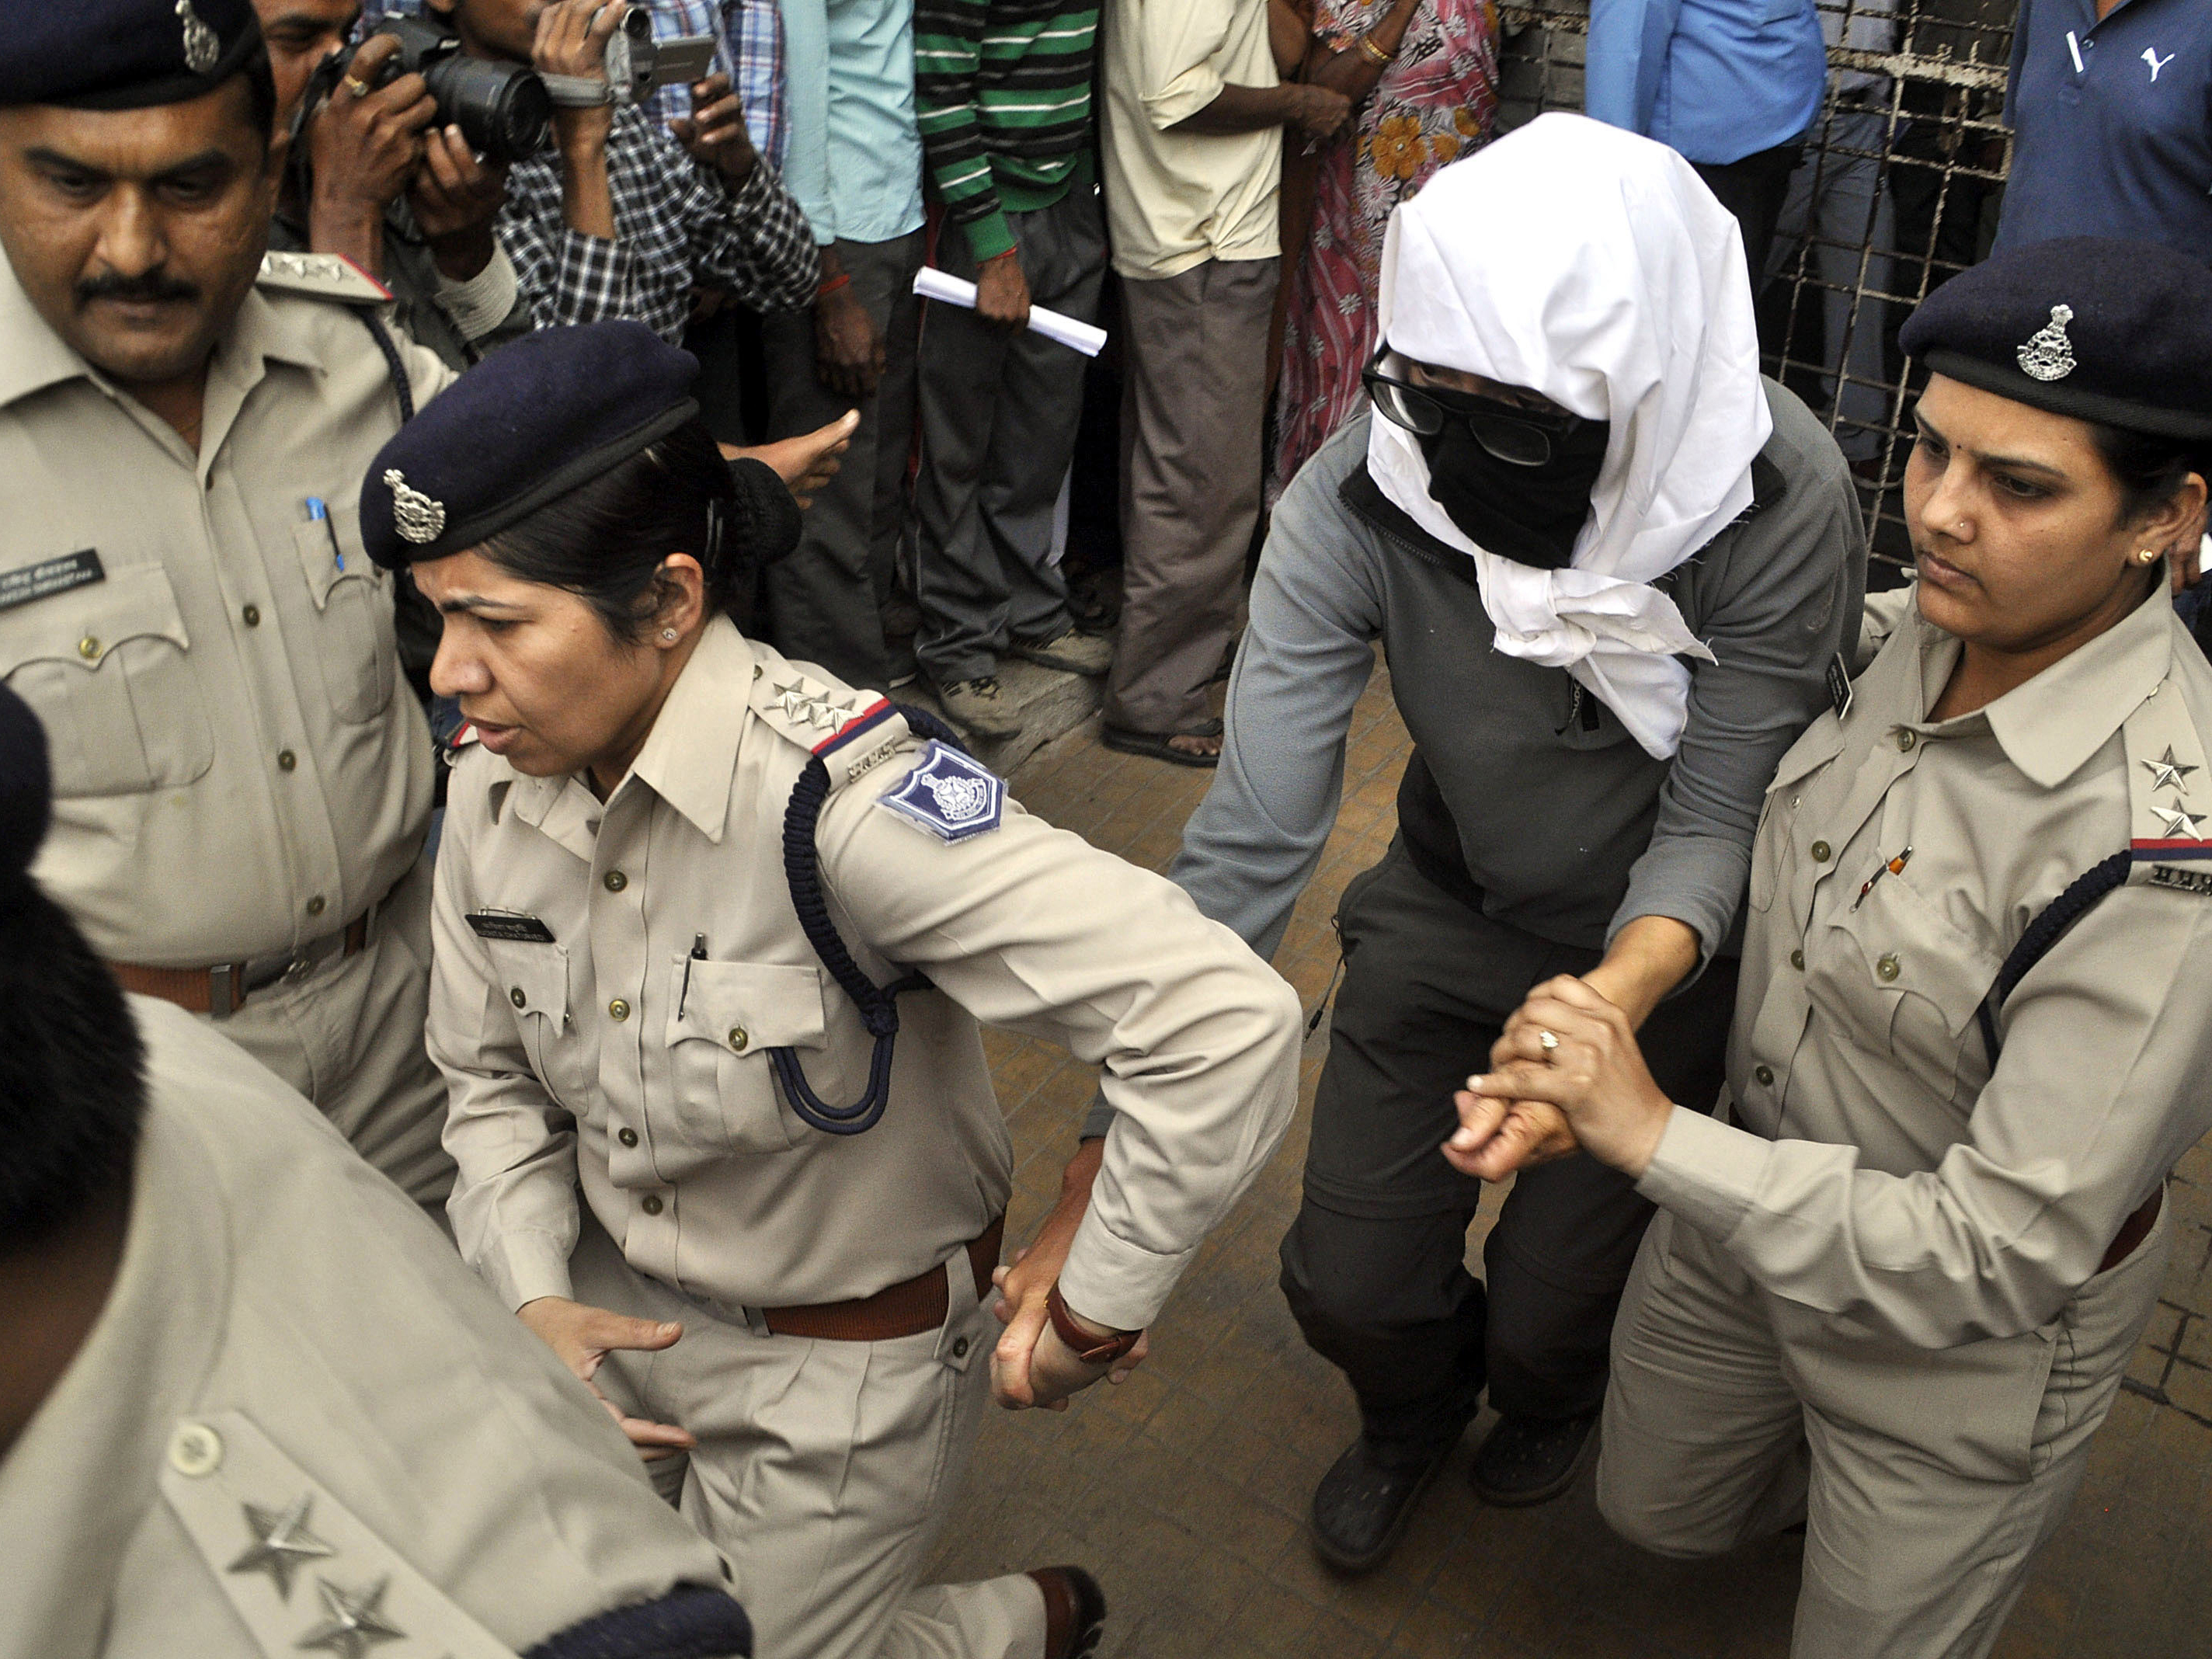 Gang-rape of tourist in India rekindles outrage - CBS News